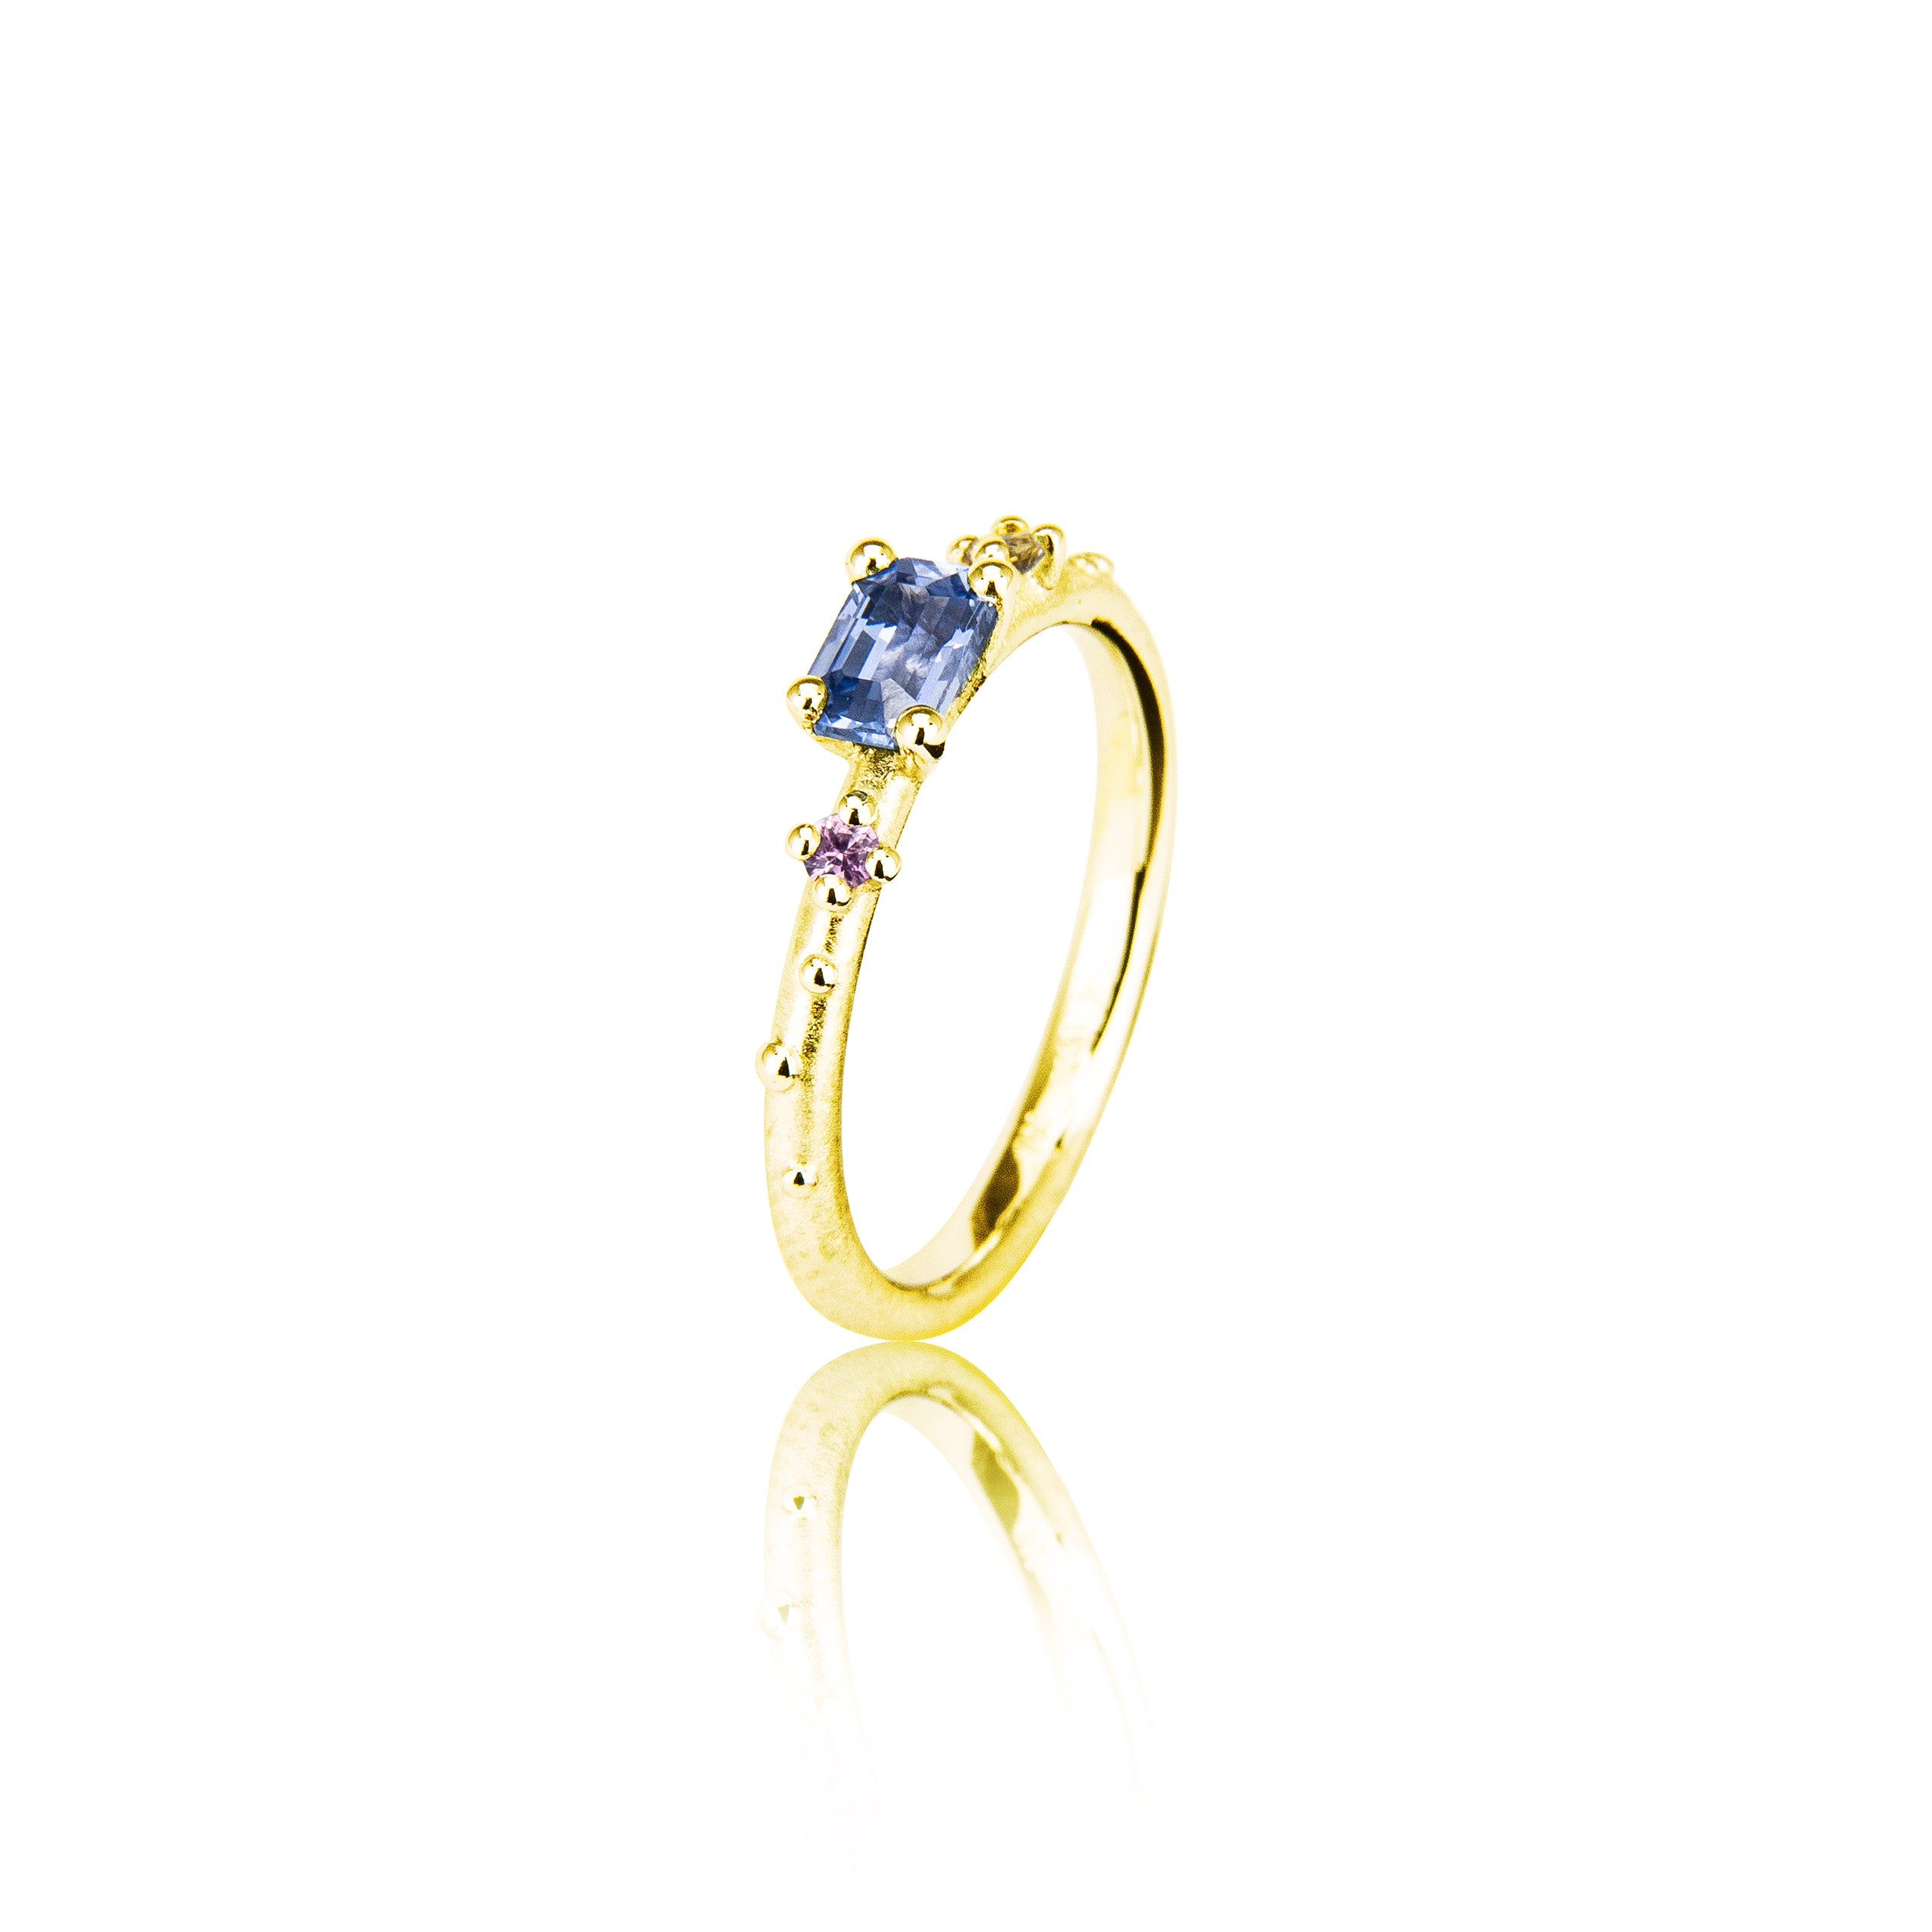 Shine ring "emerald blue" in gold with sapphires